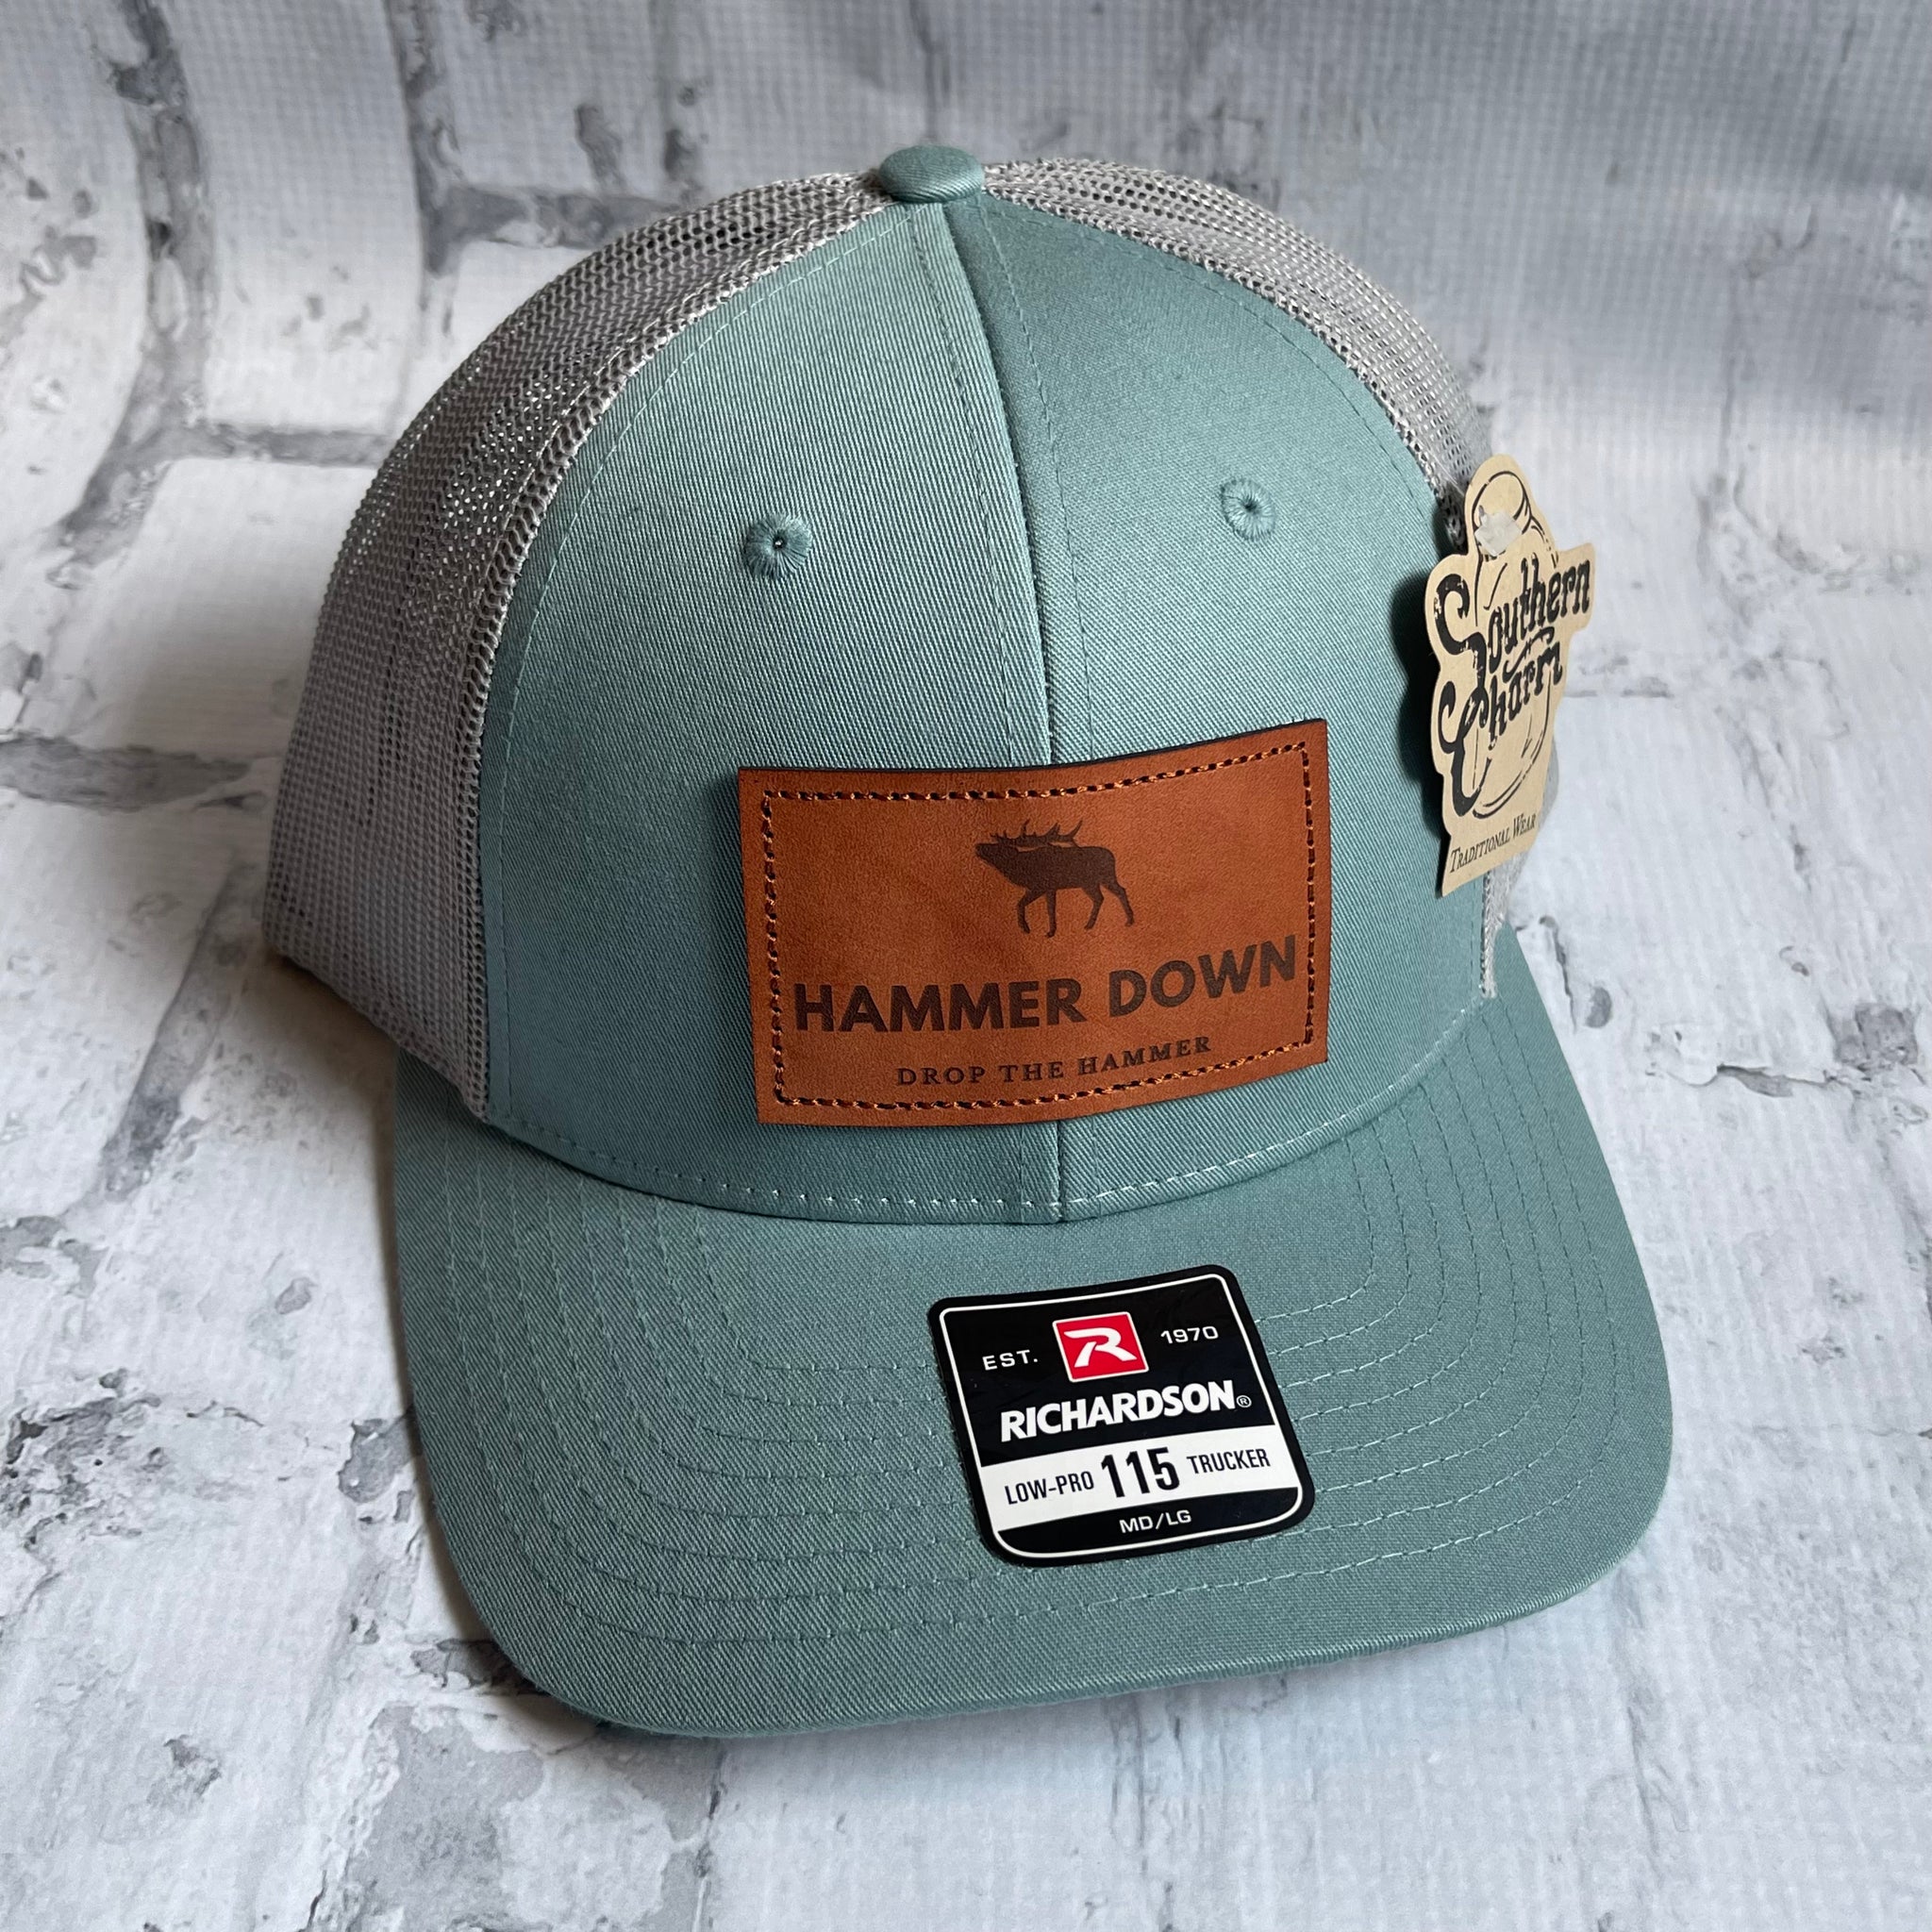 Hammer Down "DTH Elk" Hat - Smoke Blue with Leather Patch - Southern Charm "Shop The Charm"